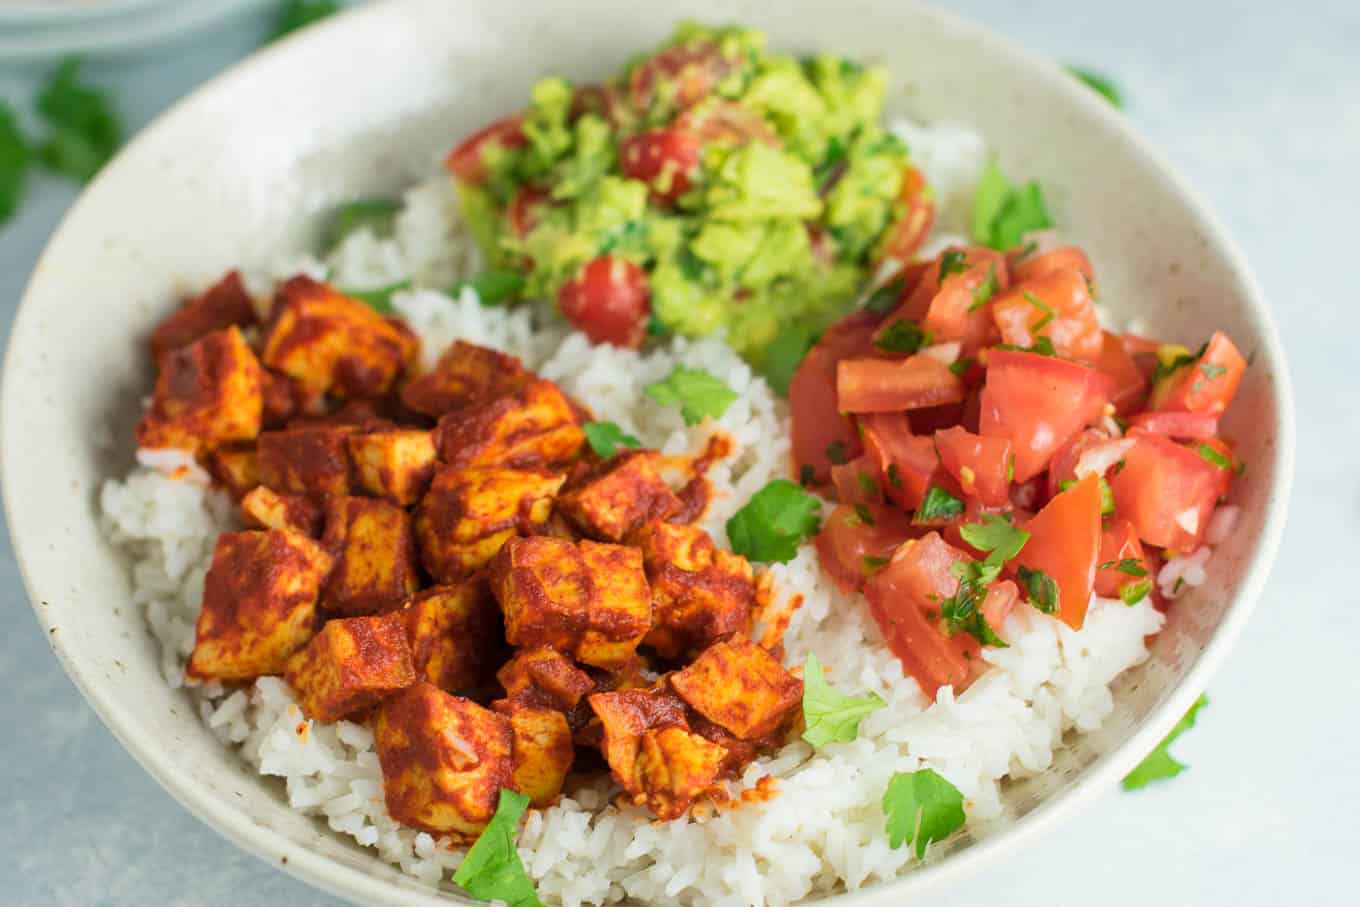 best vegan recipes - Easy enchilada tofu burrito bowls with homemade guacamole and salsa. Bring chipotle to your kitchen with this delicious recipe! #vegan #burritobowls #tofuburritobowls